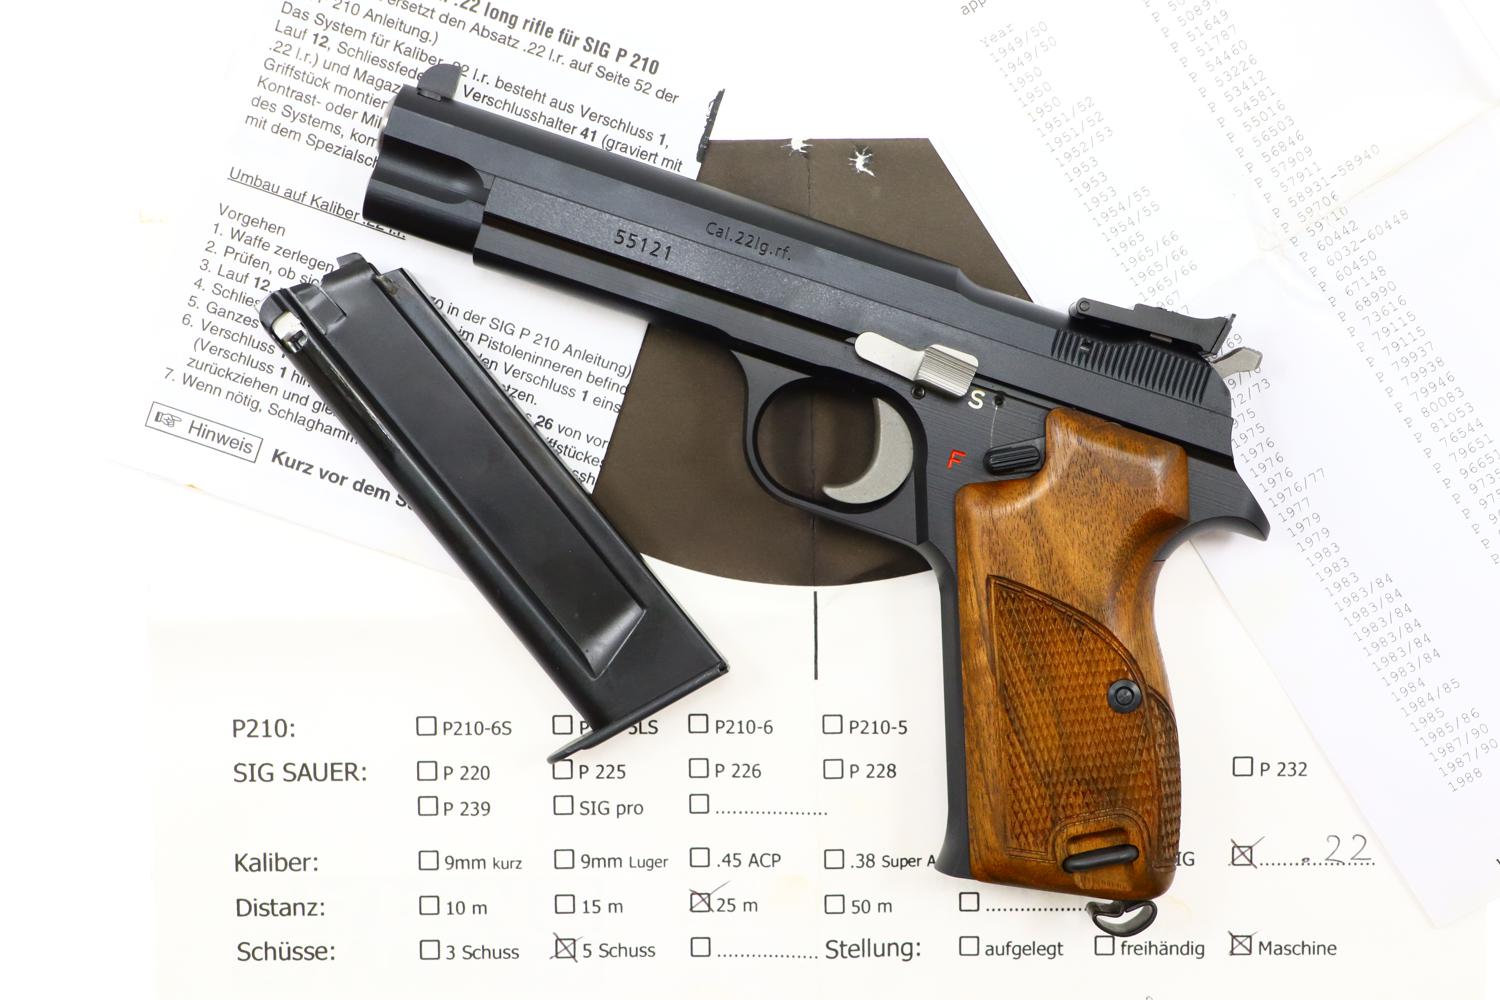 Swiss Arms SIG P210-7, Target Sights, Very Late Production, AS NEW, I-1244-img-1